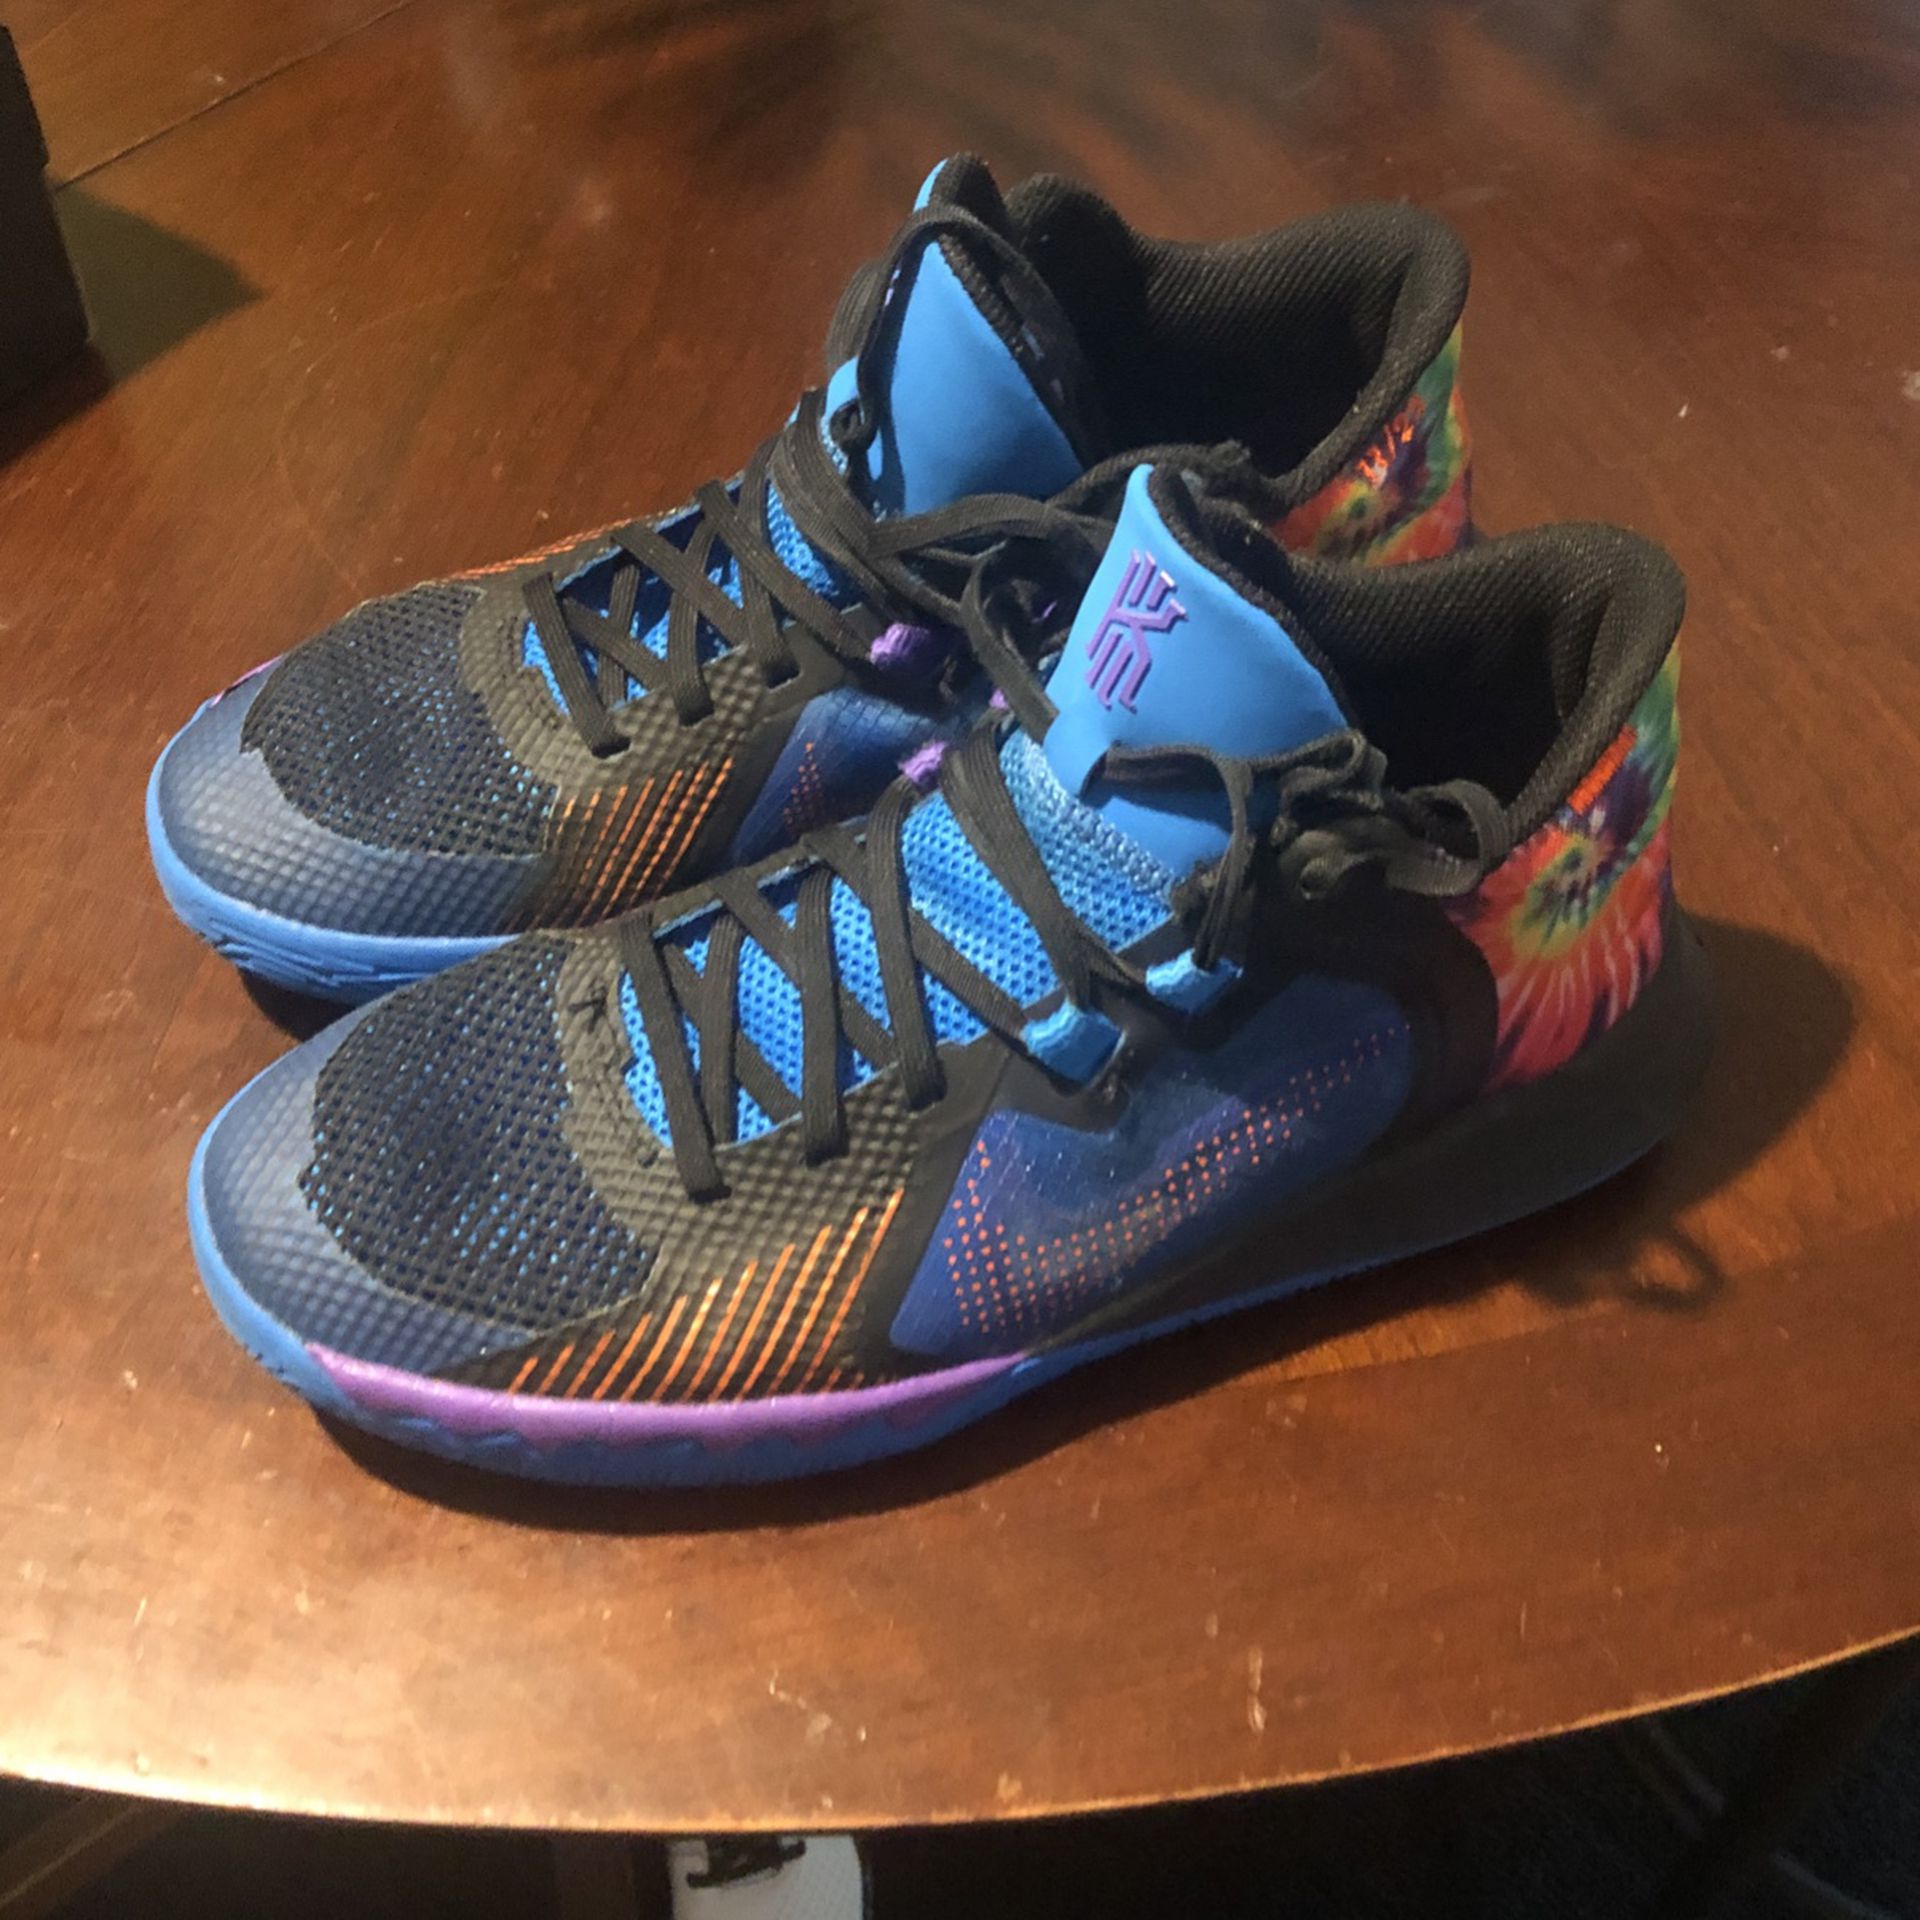 Kyrie Basketball Shoes Size 5.5 Y